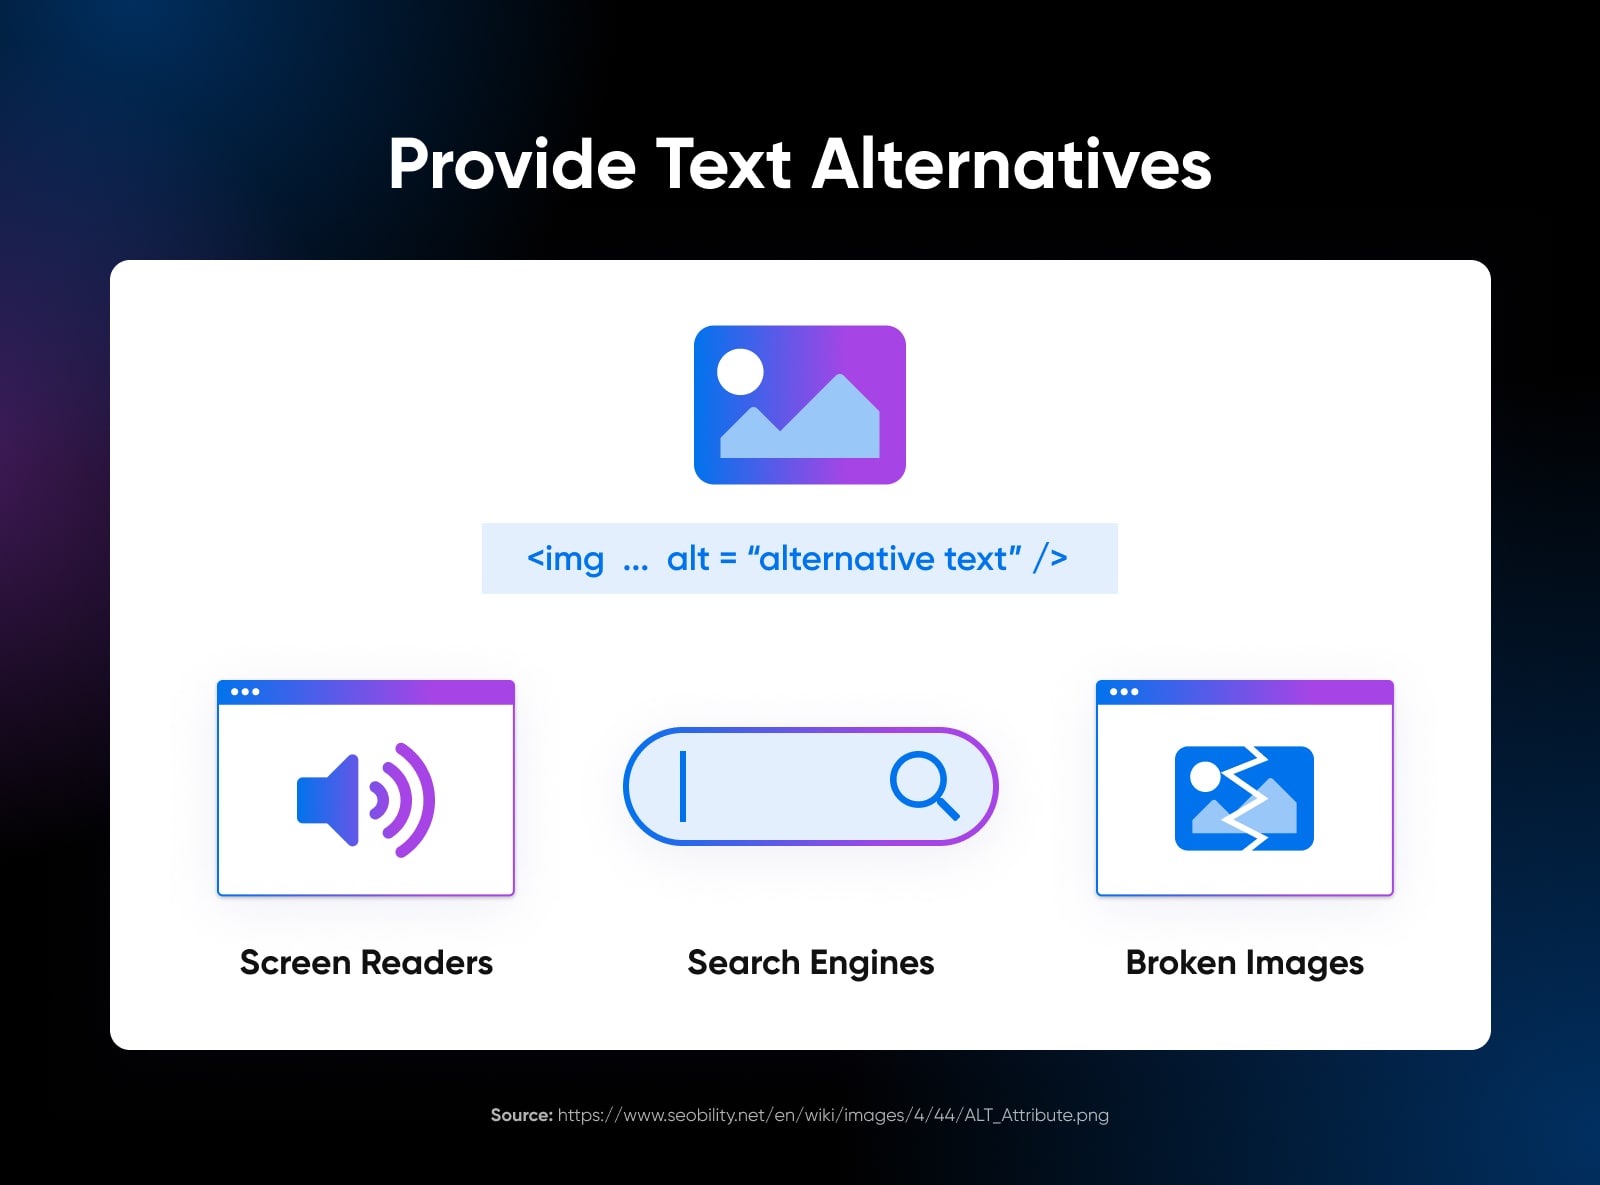 Provide text alternatives to help screen readers, search engines, and broken images have clarity 